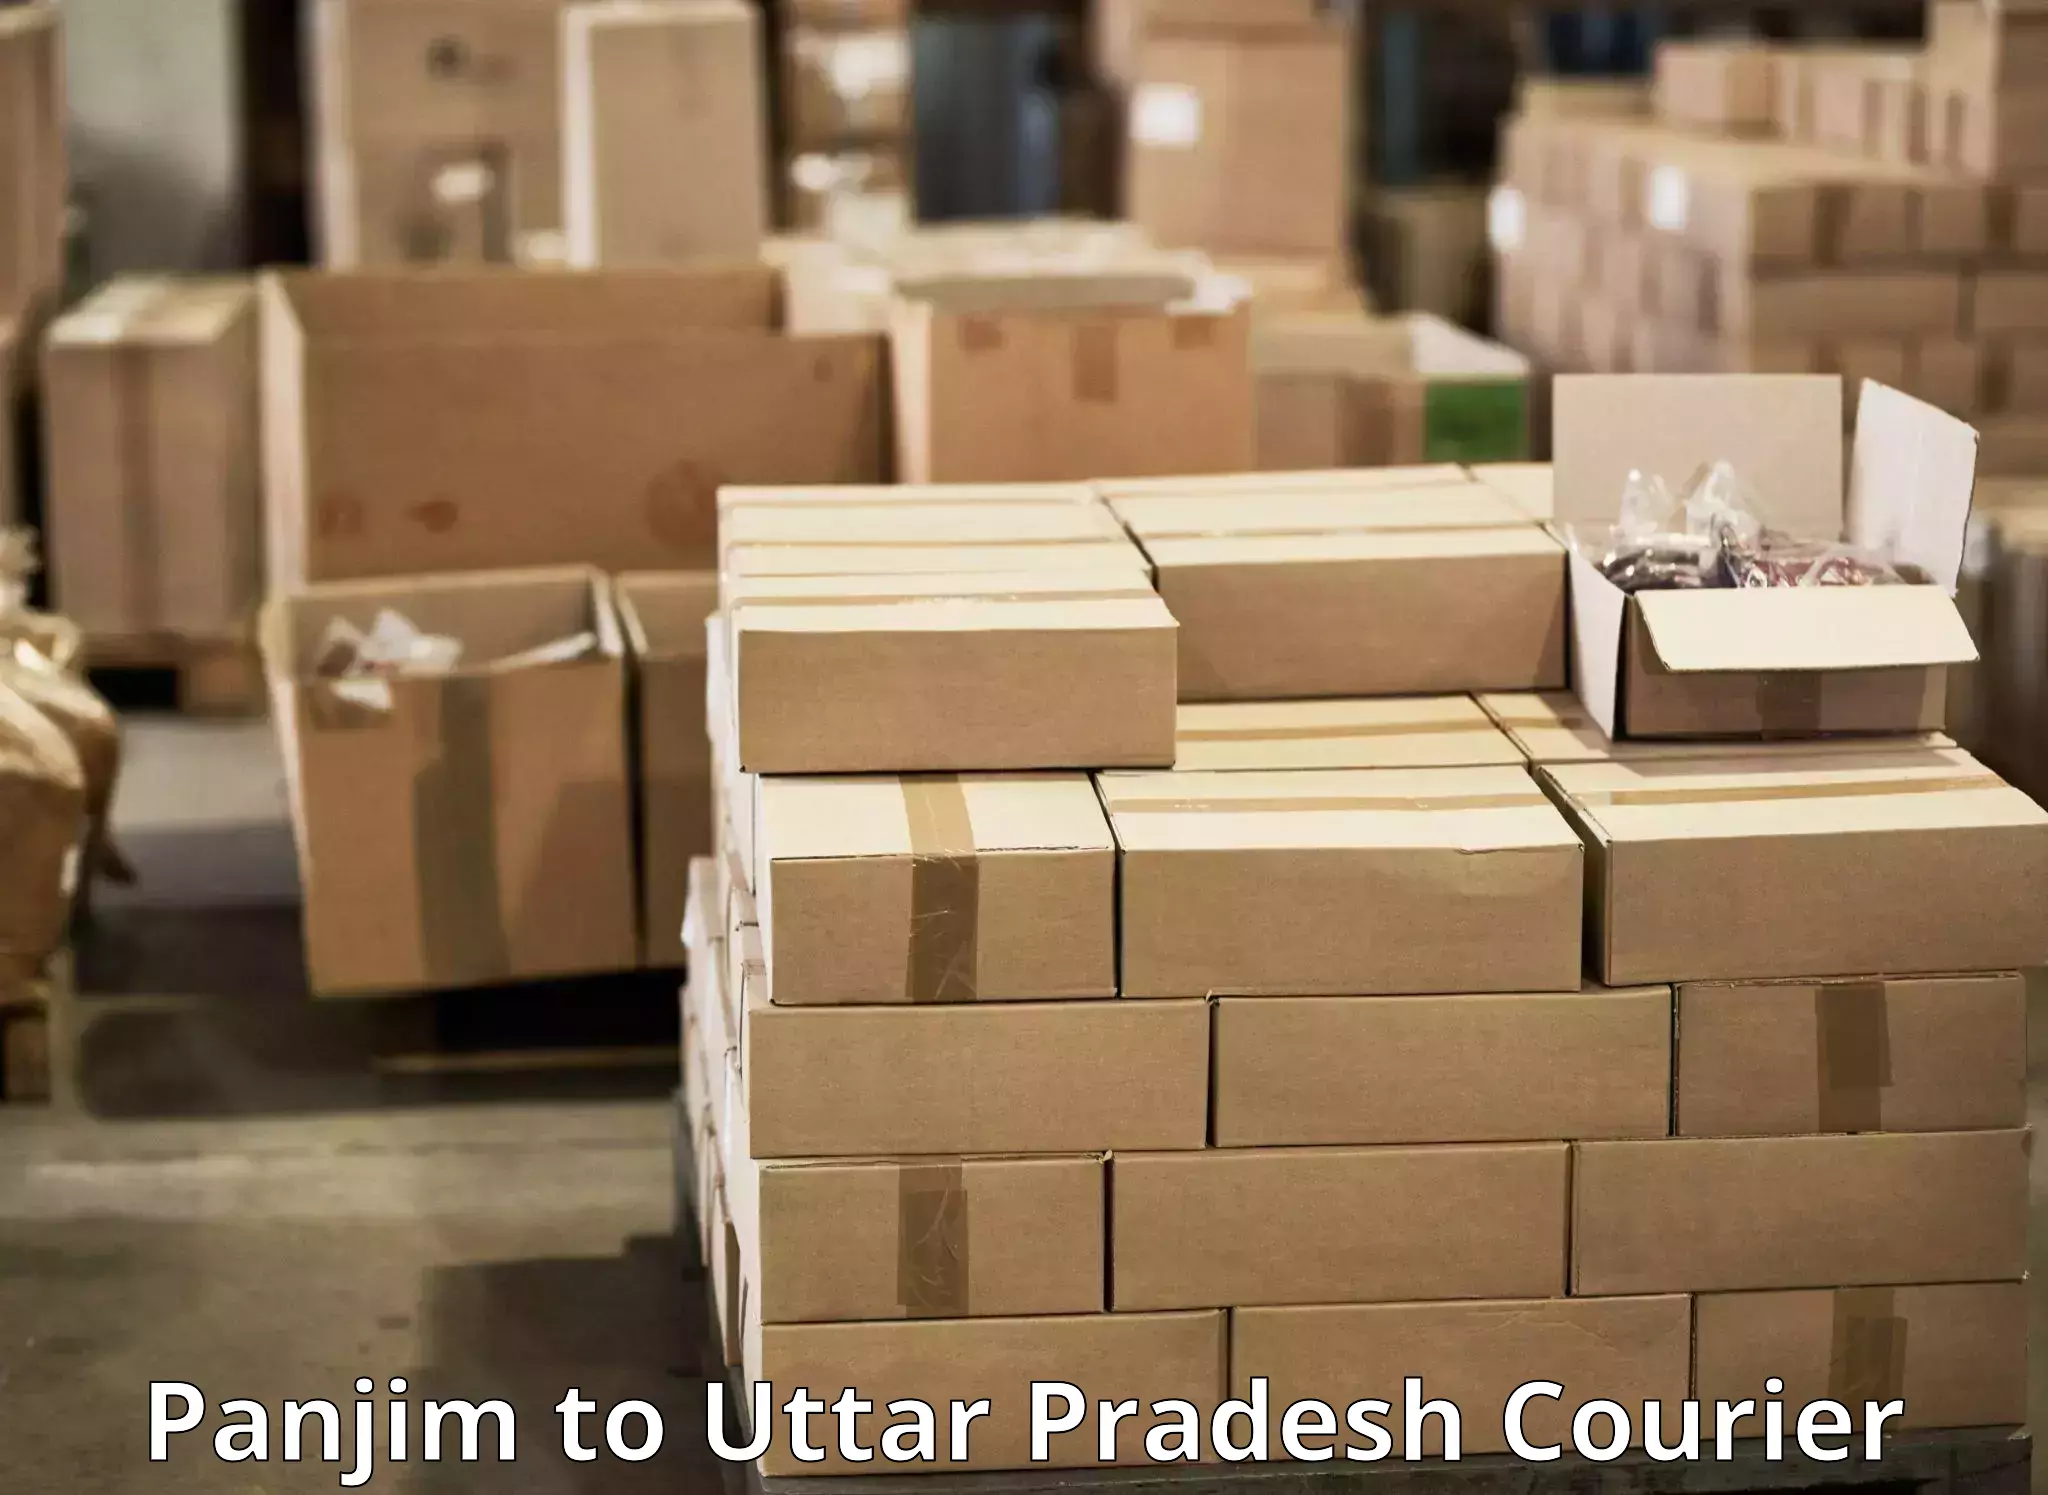 State-of-the-art courier technology Panjim to Khalilabad